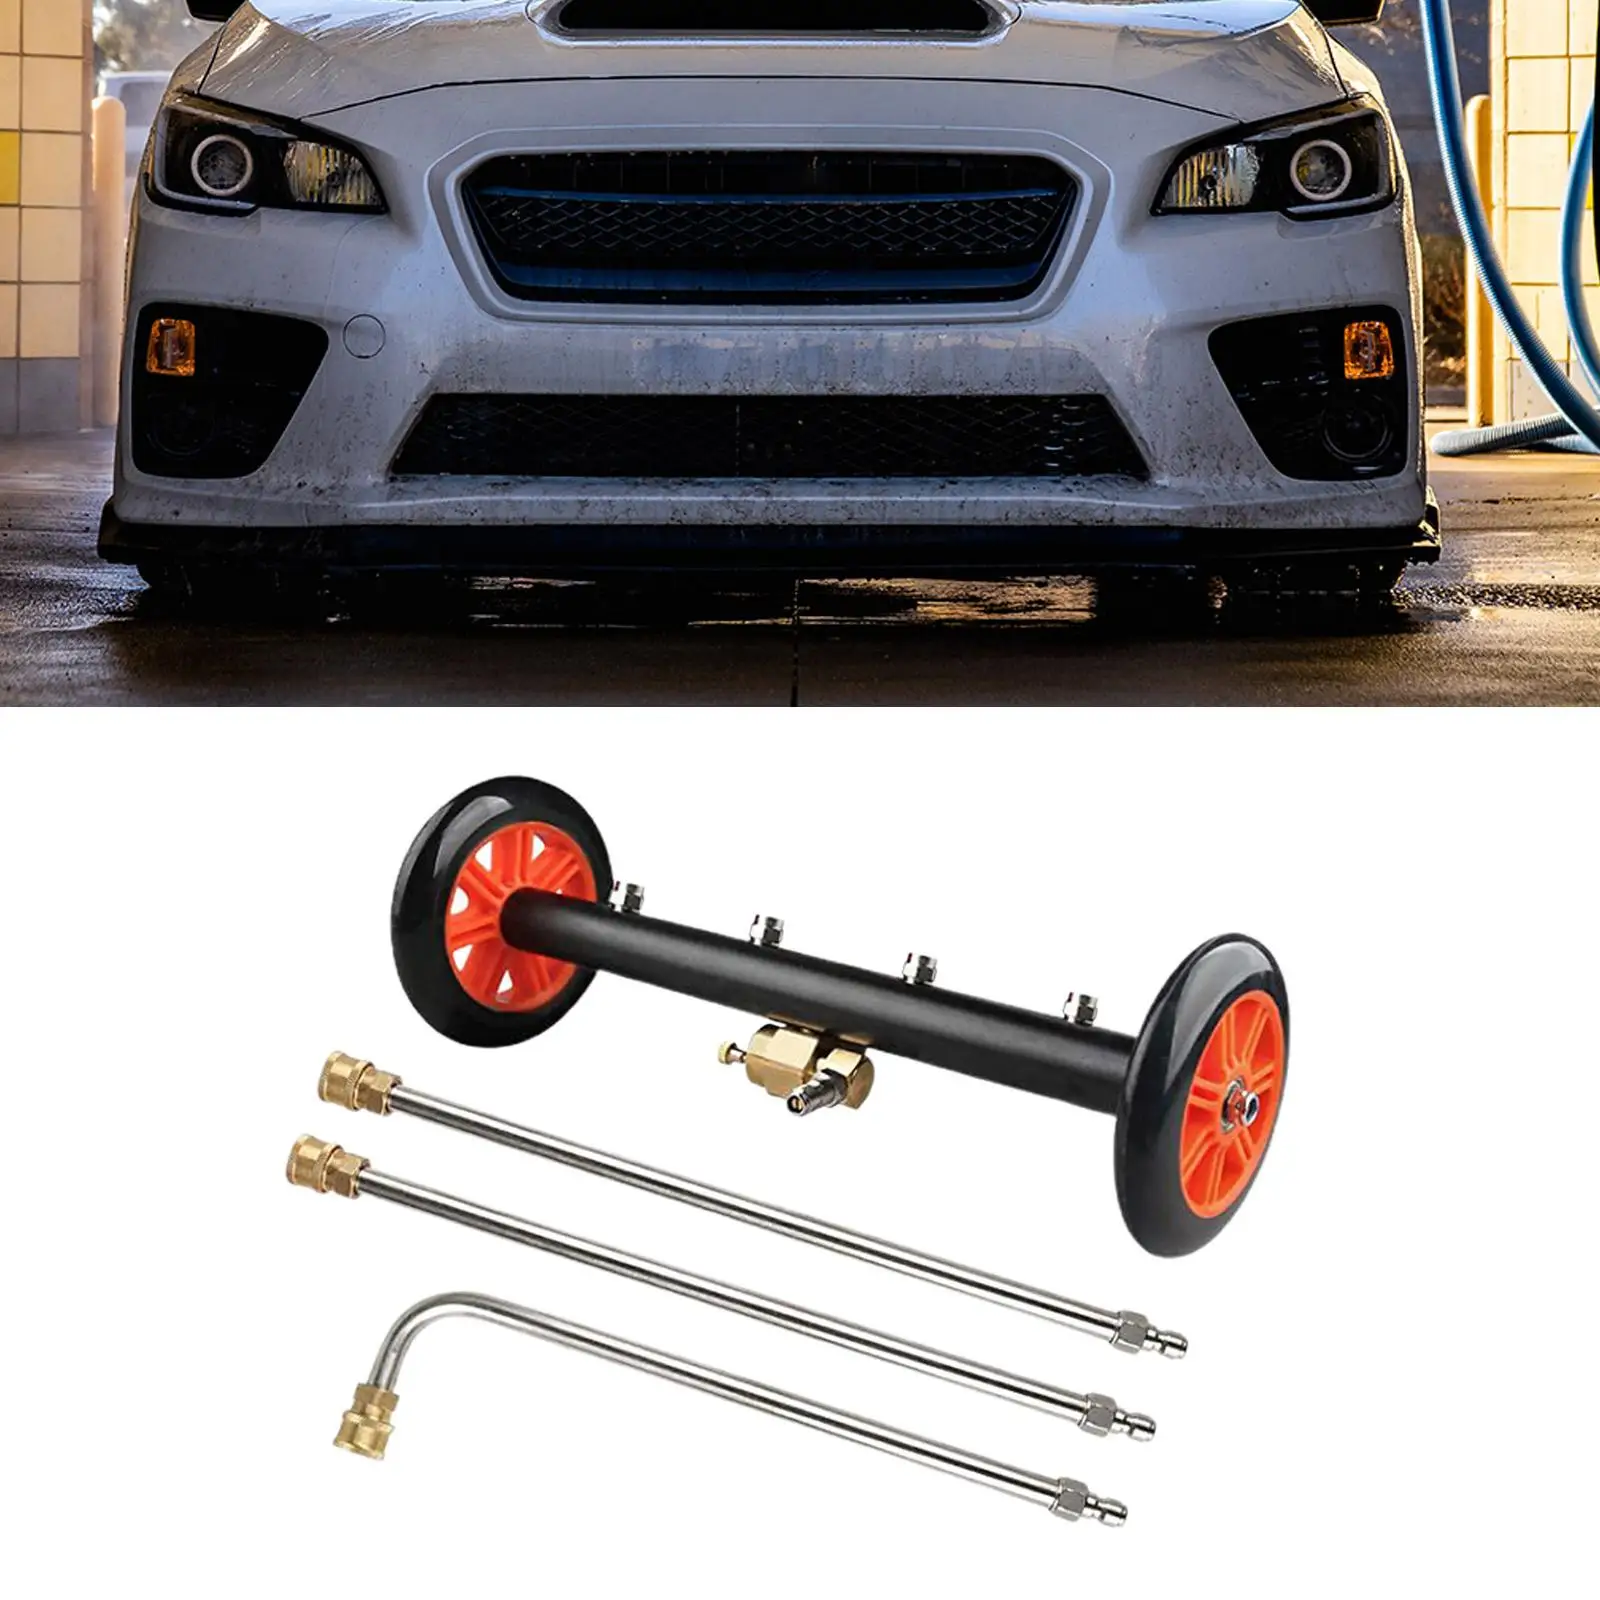 Undercarriage Pressure Washer Attachment Adjustable for Driveways